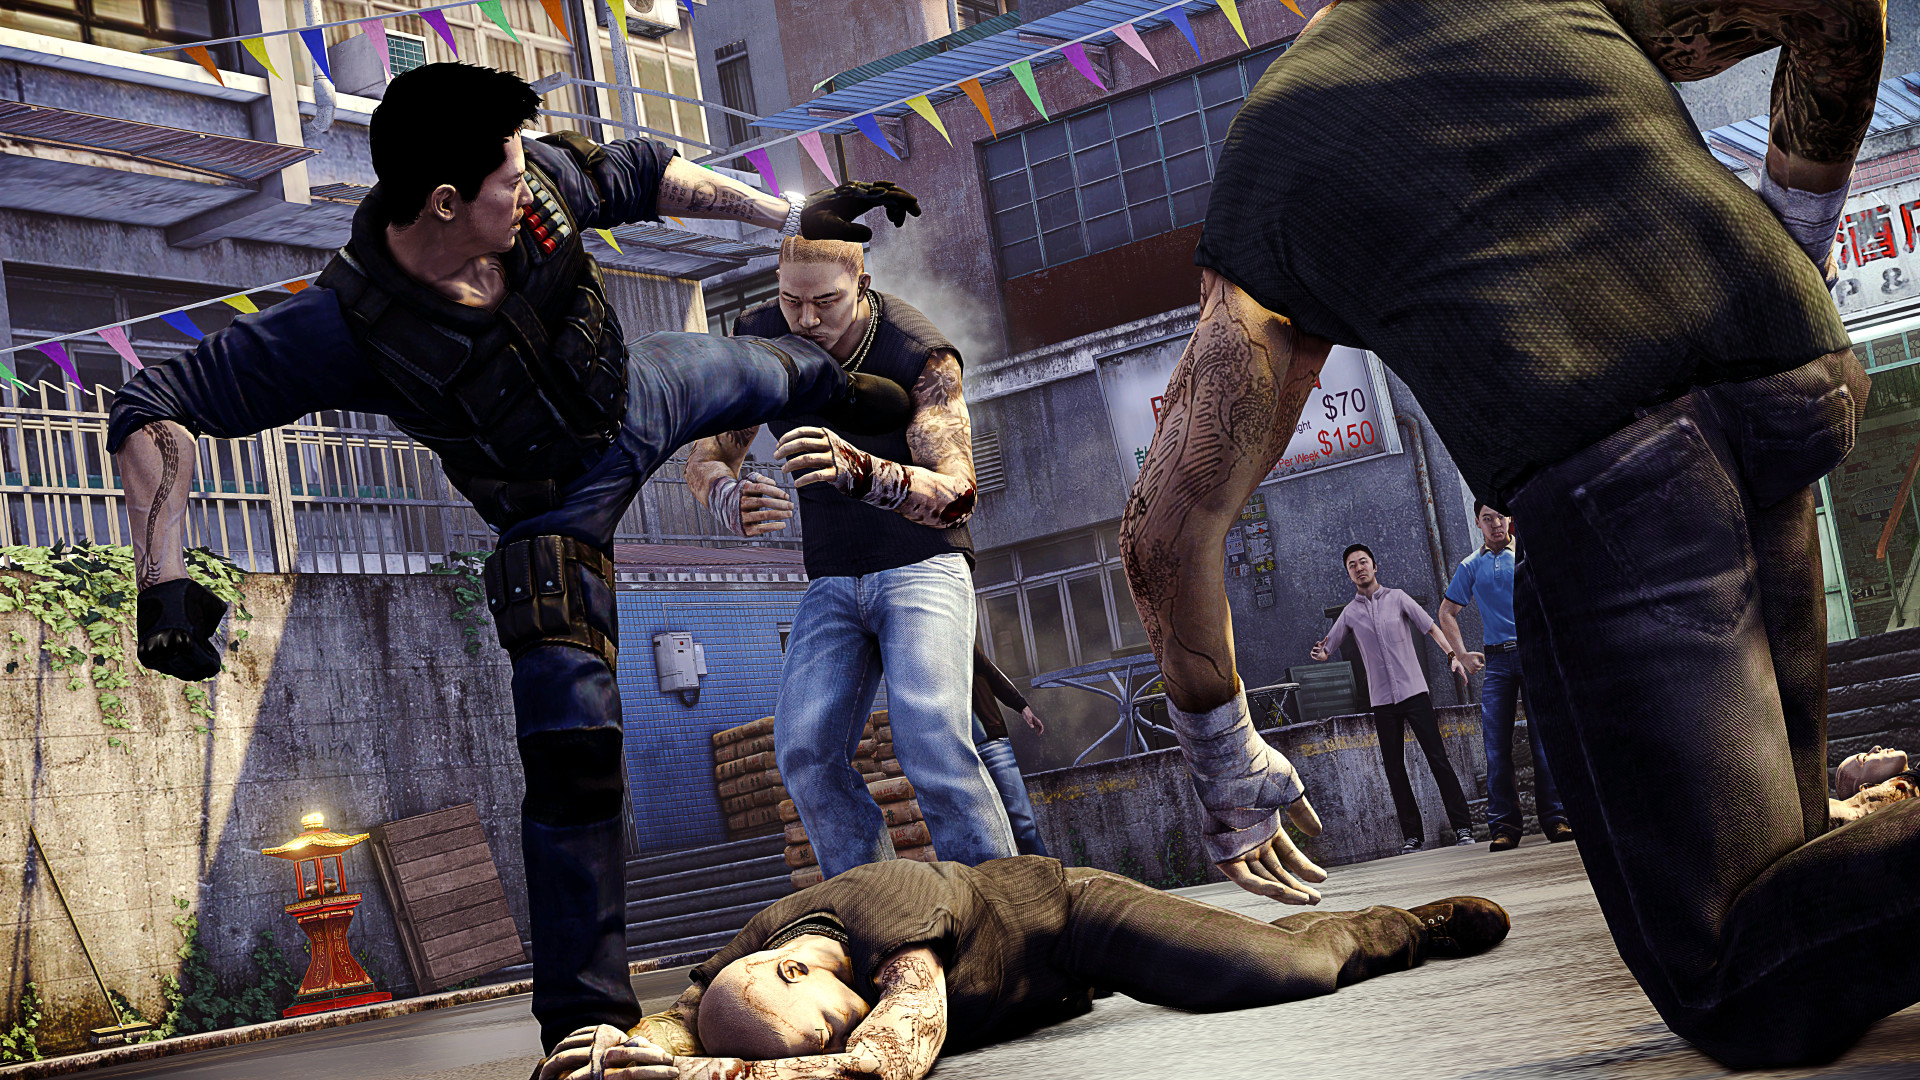 download sleeping dogs 3